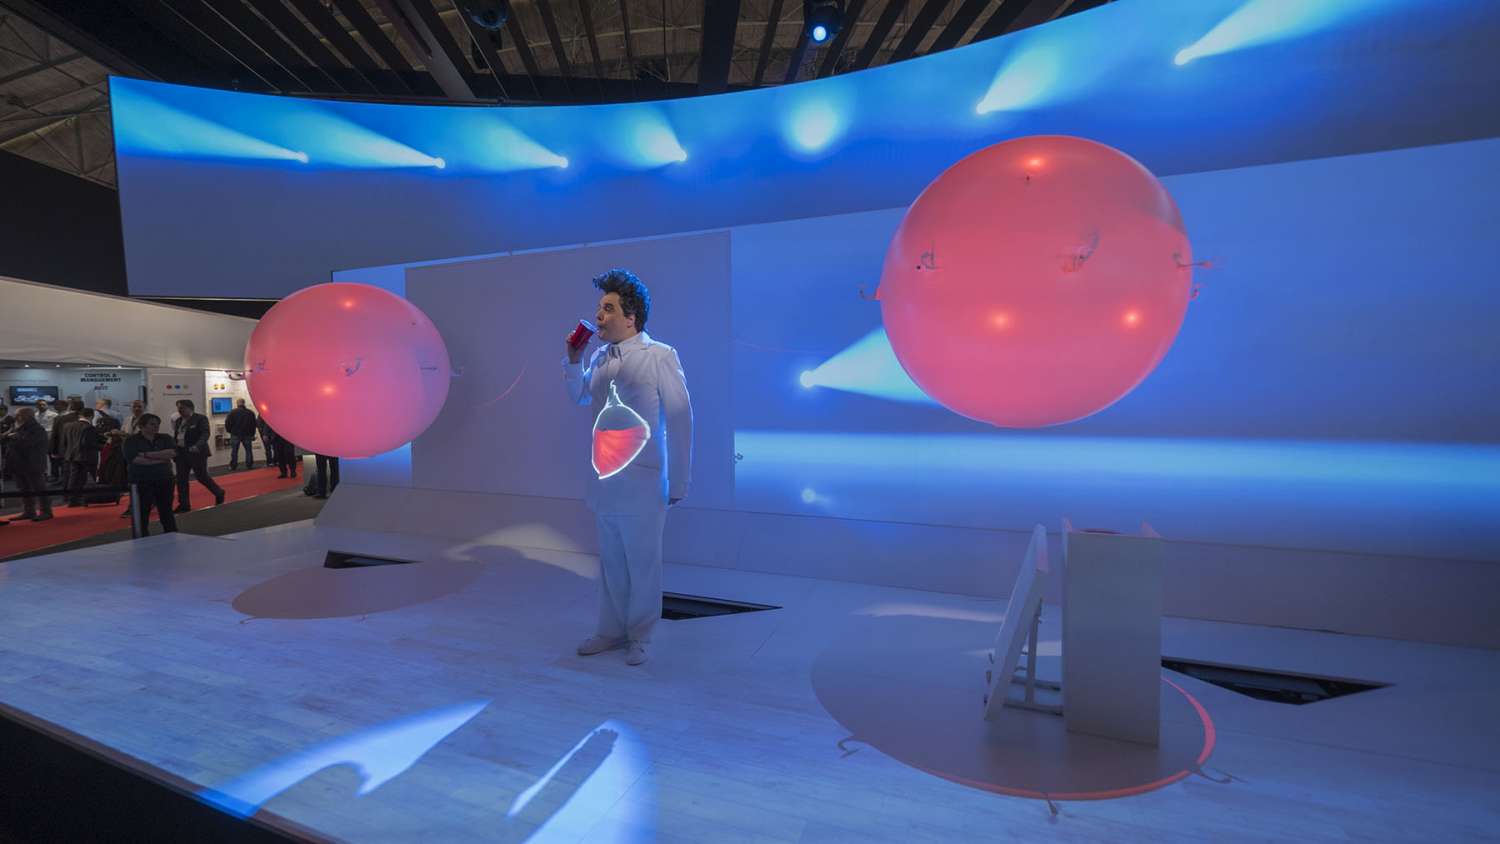 Painting with Light was commissioned by Panasonic to produce a high-impact multimedia live show for their stand